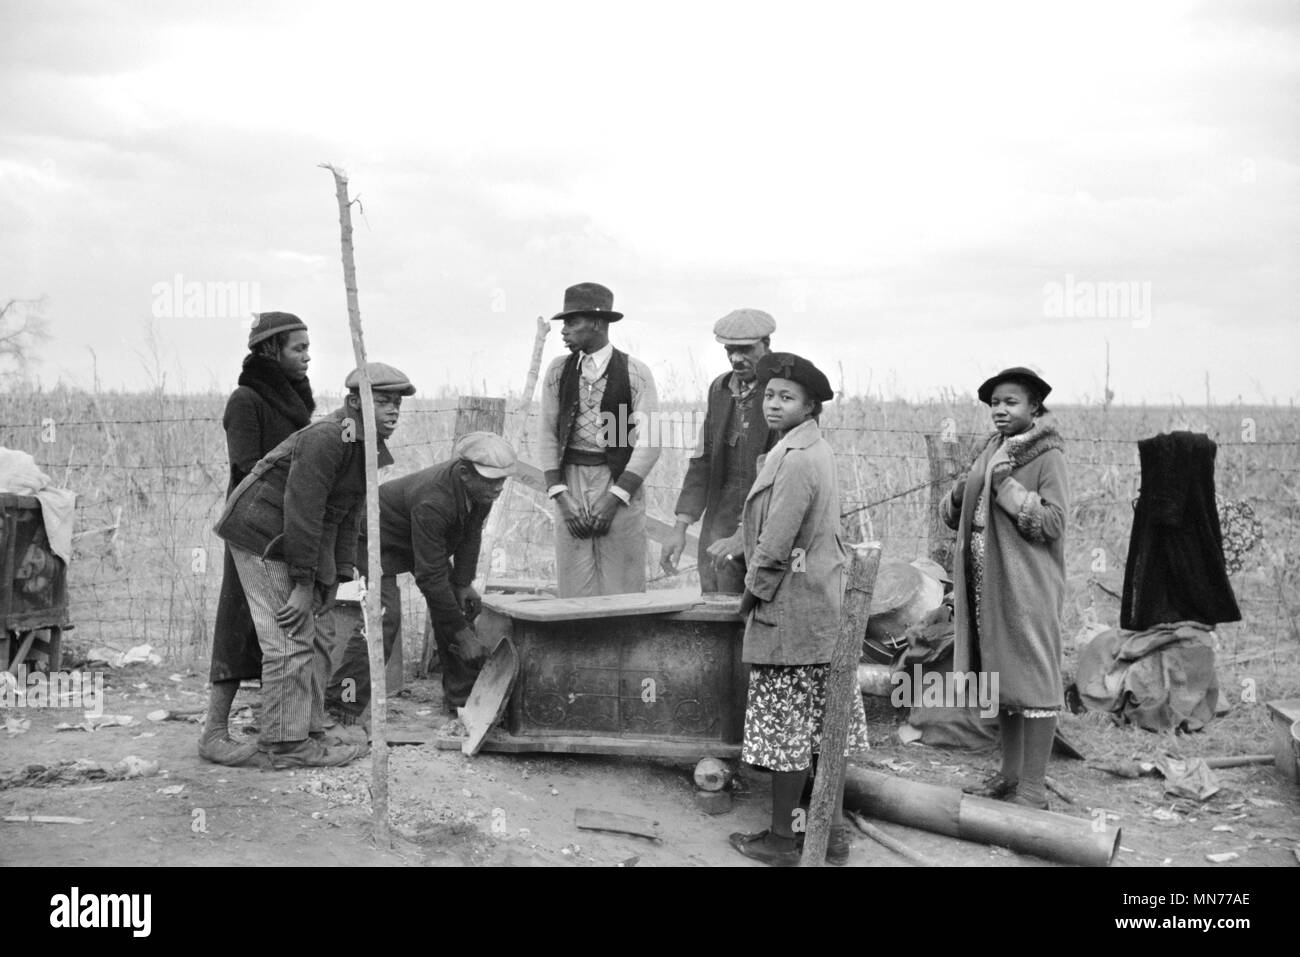 Evicted Sharecroppers Along Highway 60, New Madrid County, Missouri, USA, Arthur Rothstein for Farm Security Administration, January 1939 Stock Photo